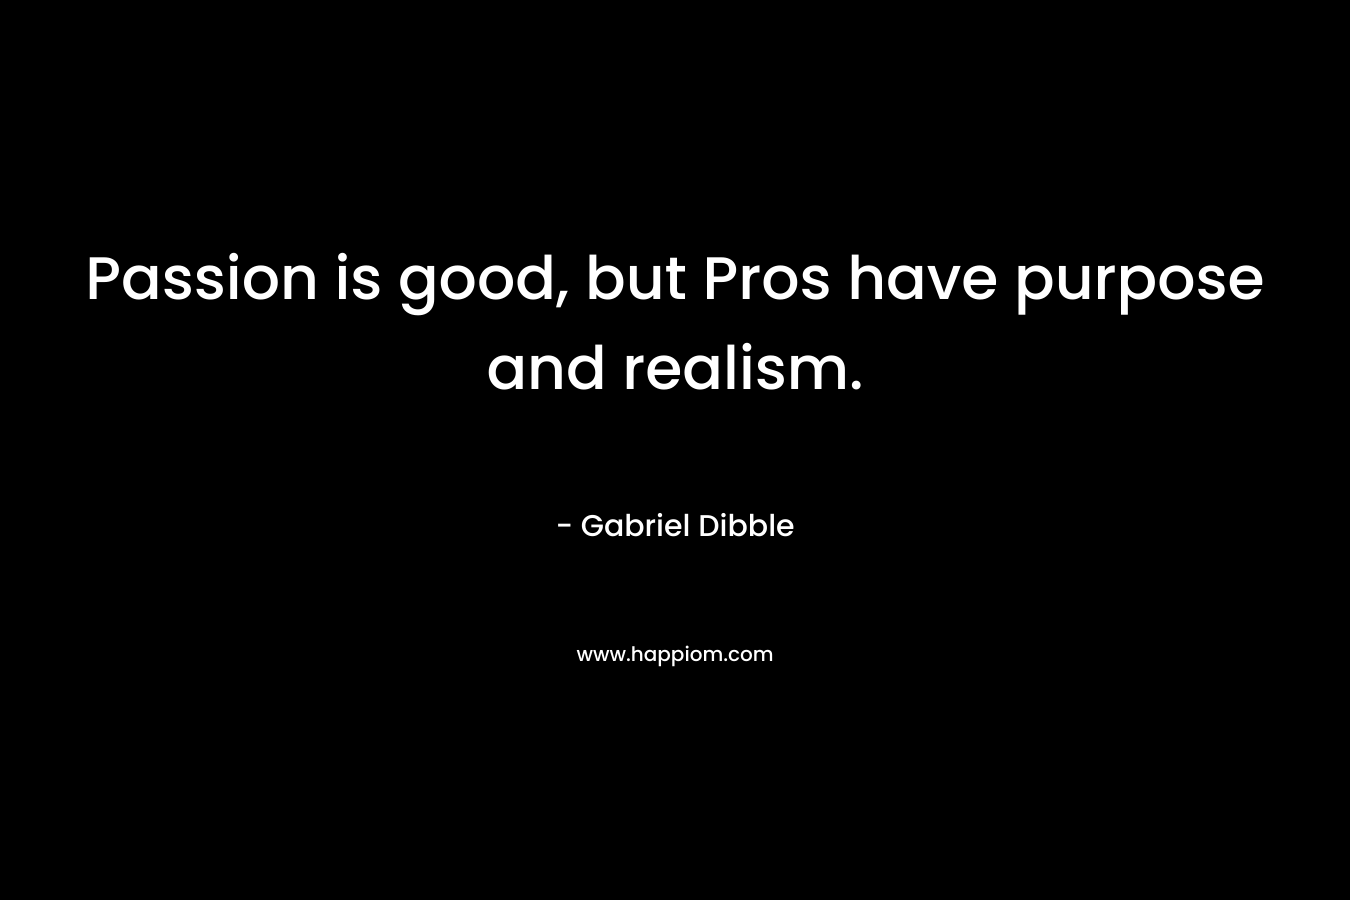 Passion is good, but Pros have purpose and realism.